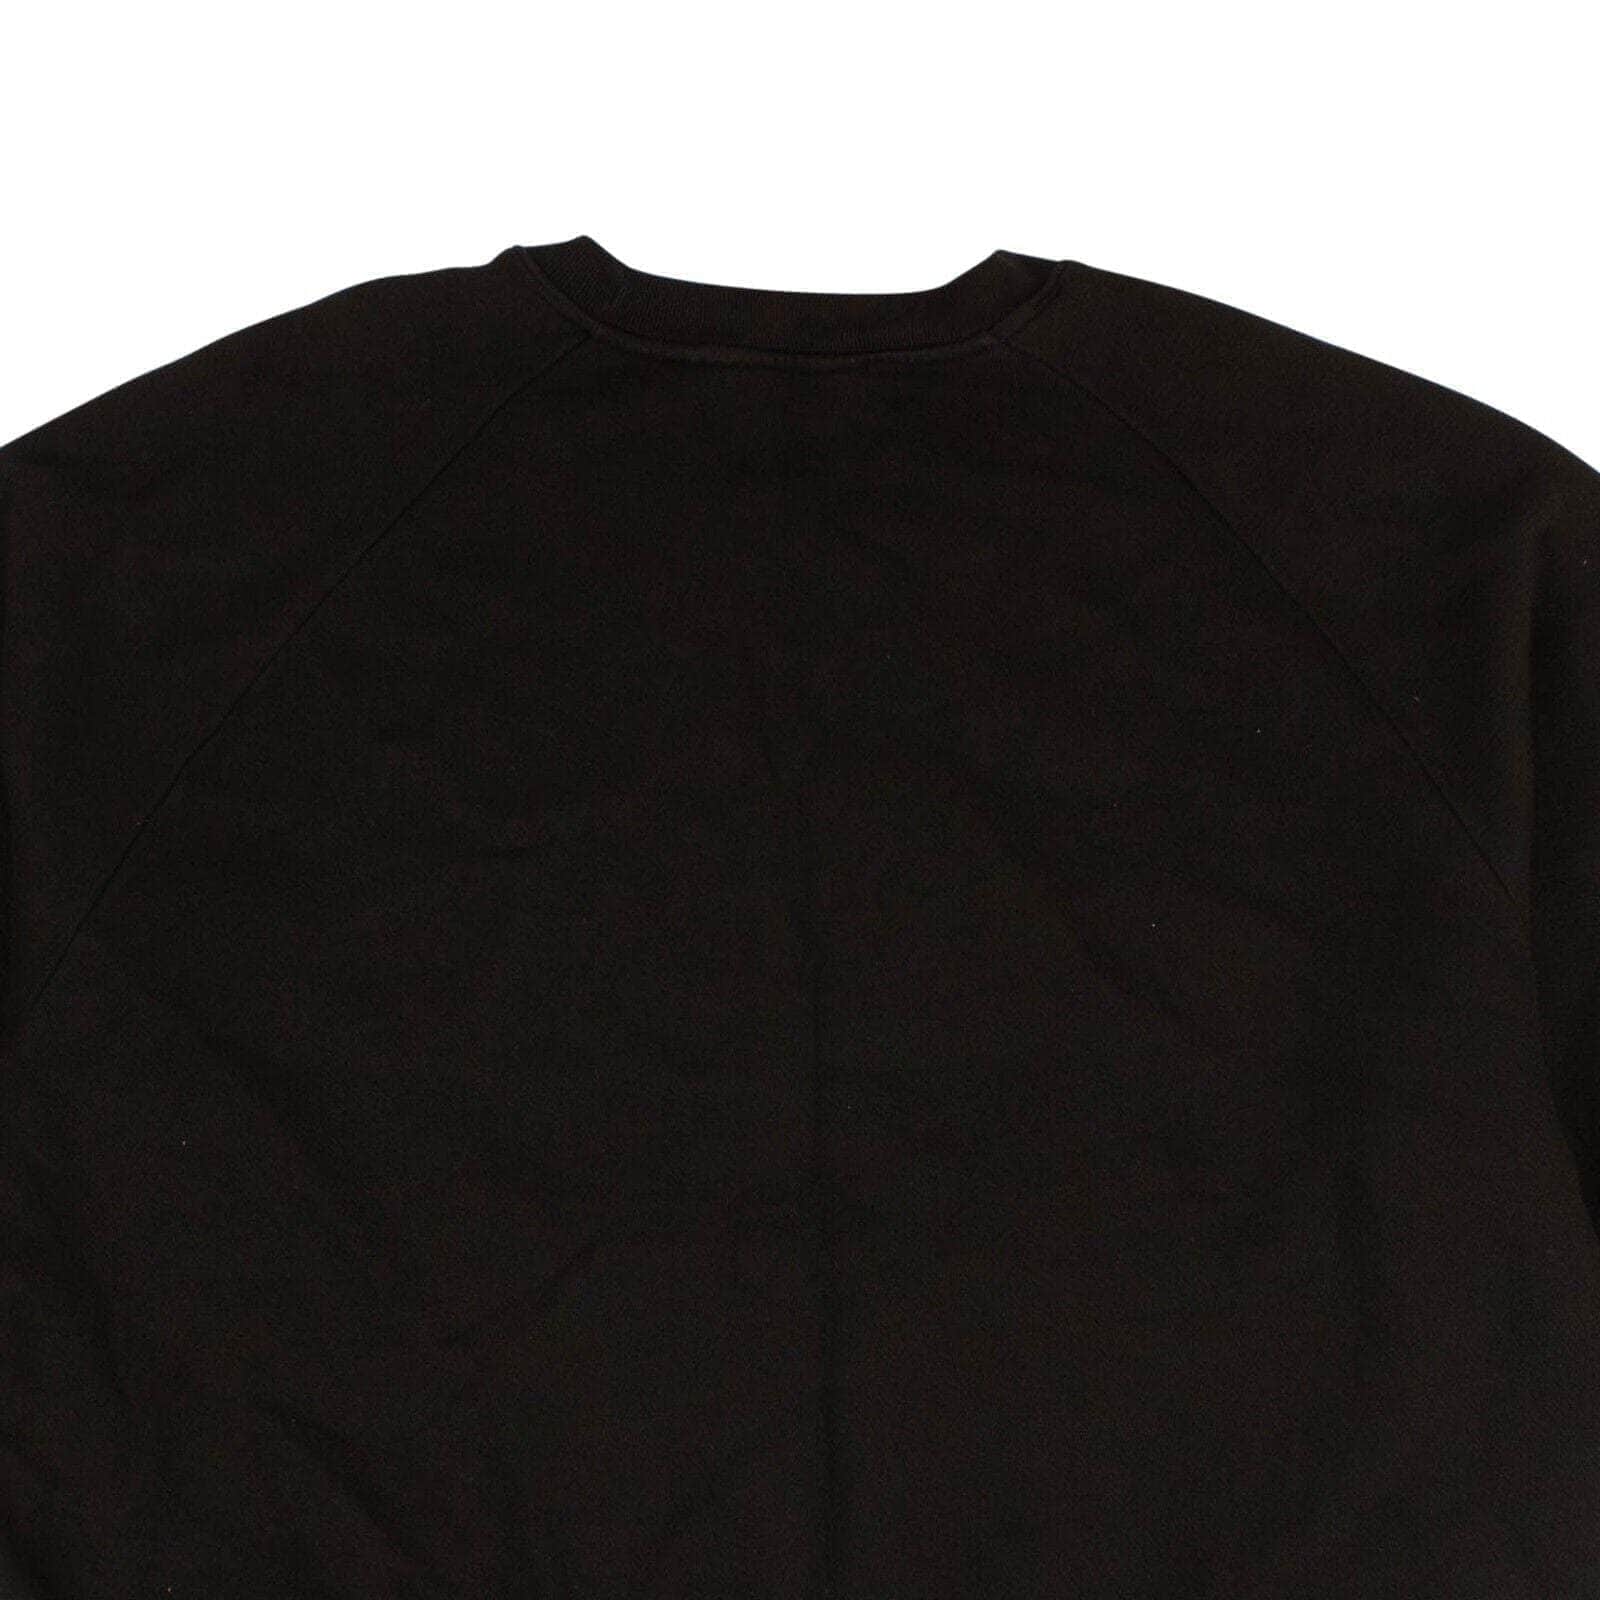 Lost Daze channelenable-all, chicmi, couponcollection, gender-mens, lost-daze, main-clothing, mens-shoes, size-m, under-250 Black Mad Cat Crewneck Sweatshirt